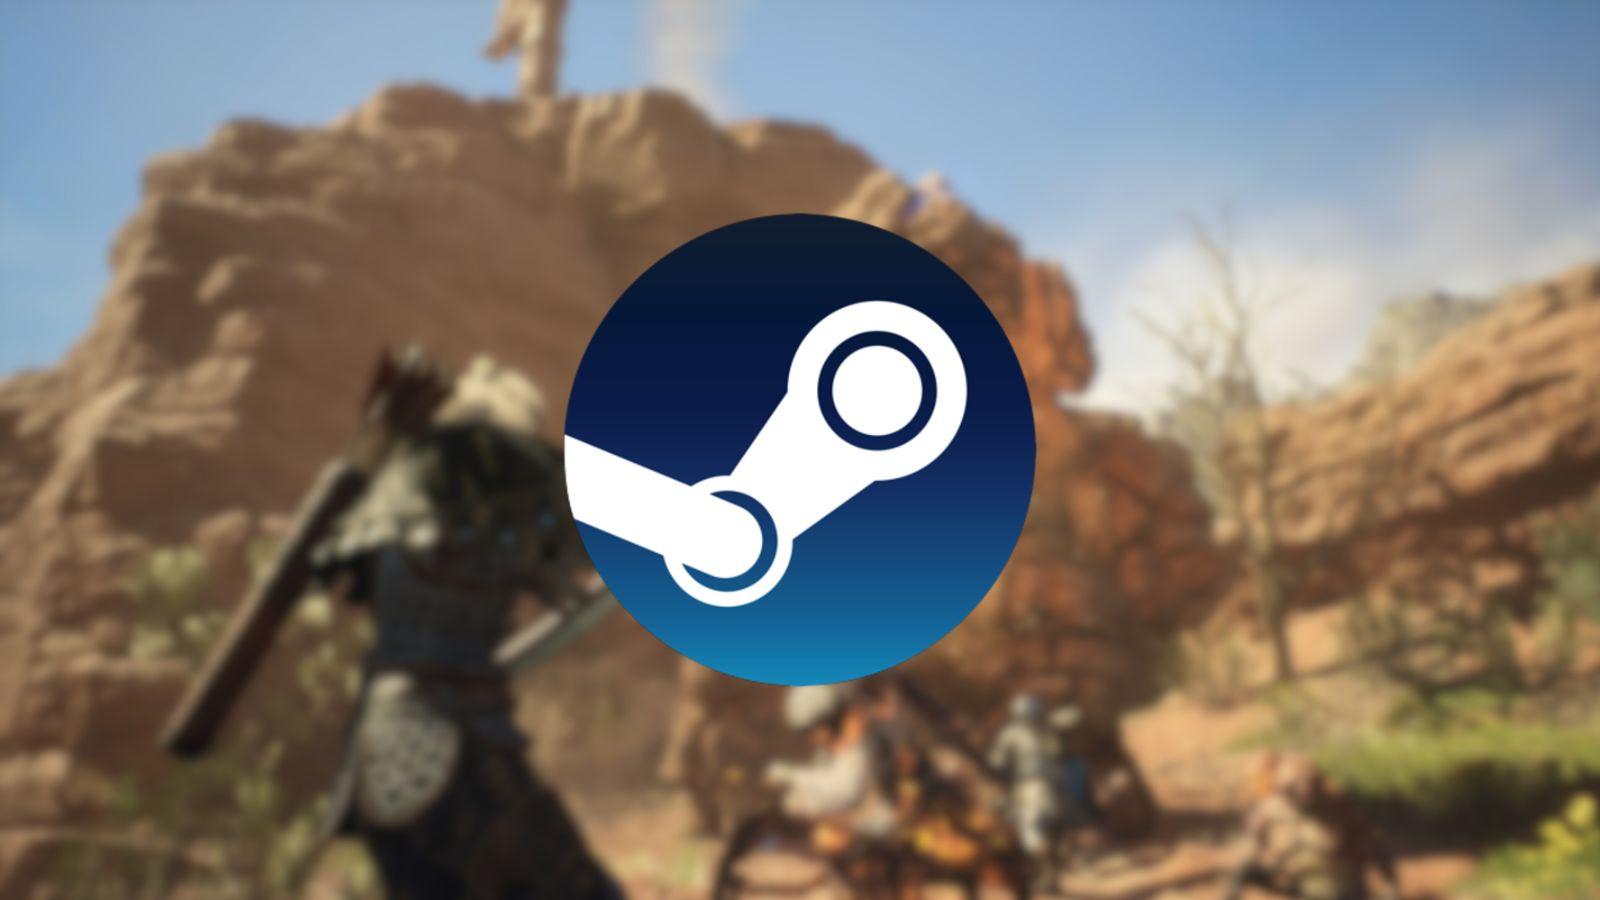 The Steam logo on a Dragon's Dogma 2 background